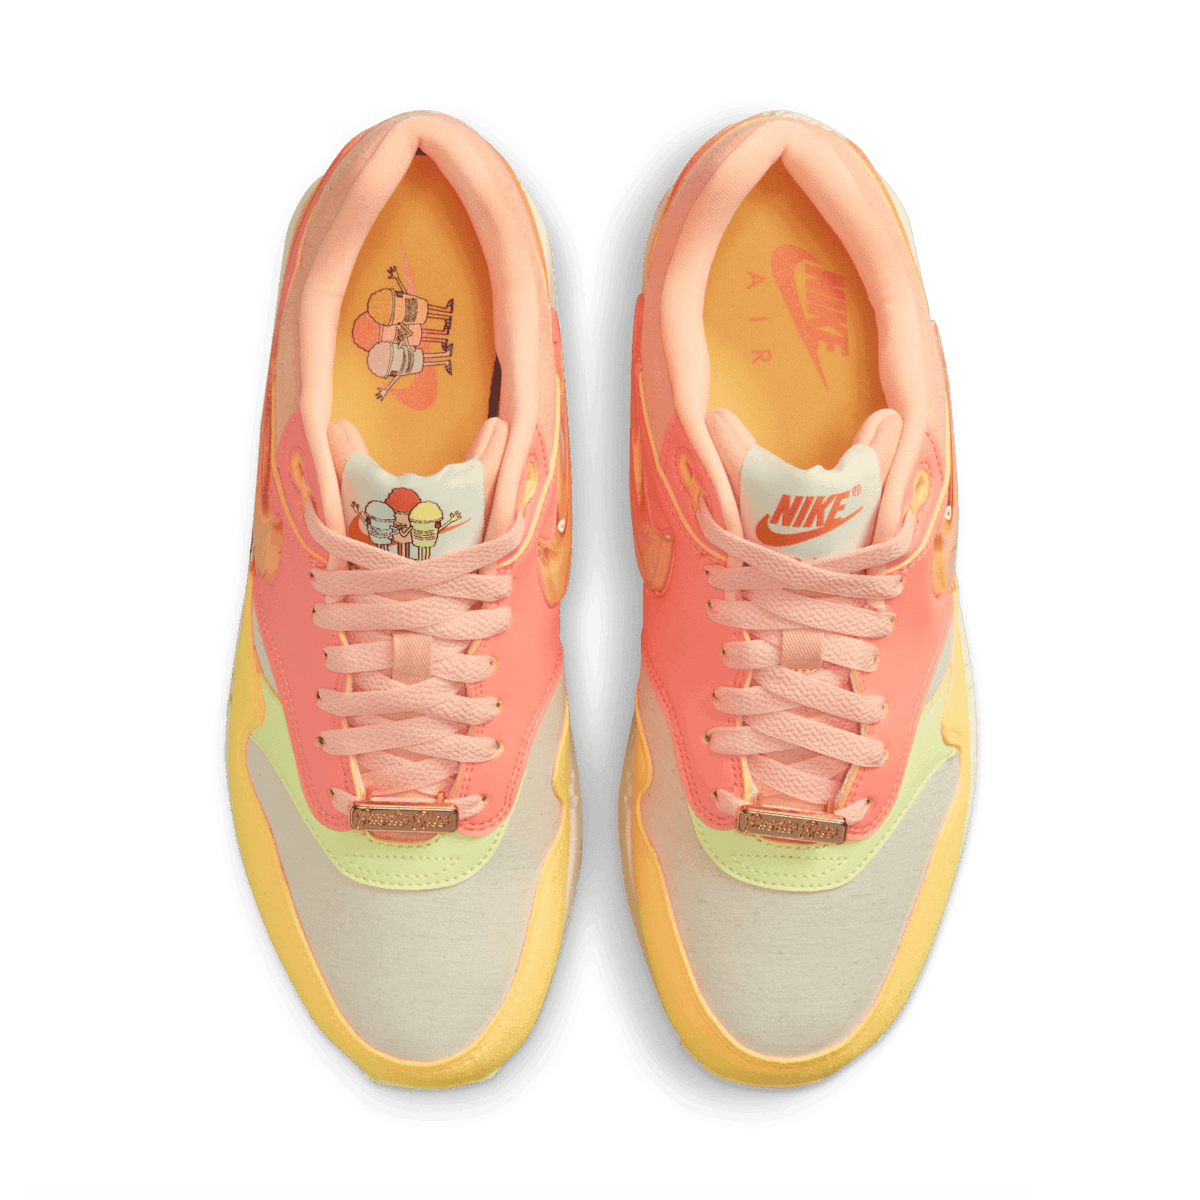 Nike Air Max 1 Puerto Rico Day Orange Frost Angle 1